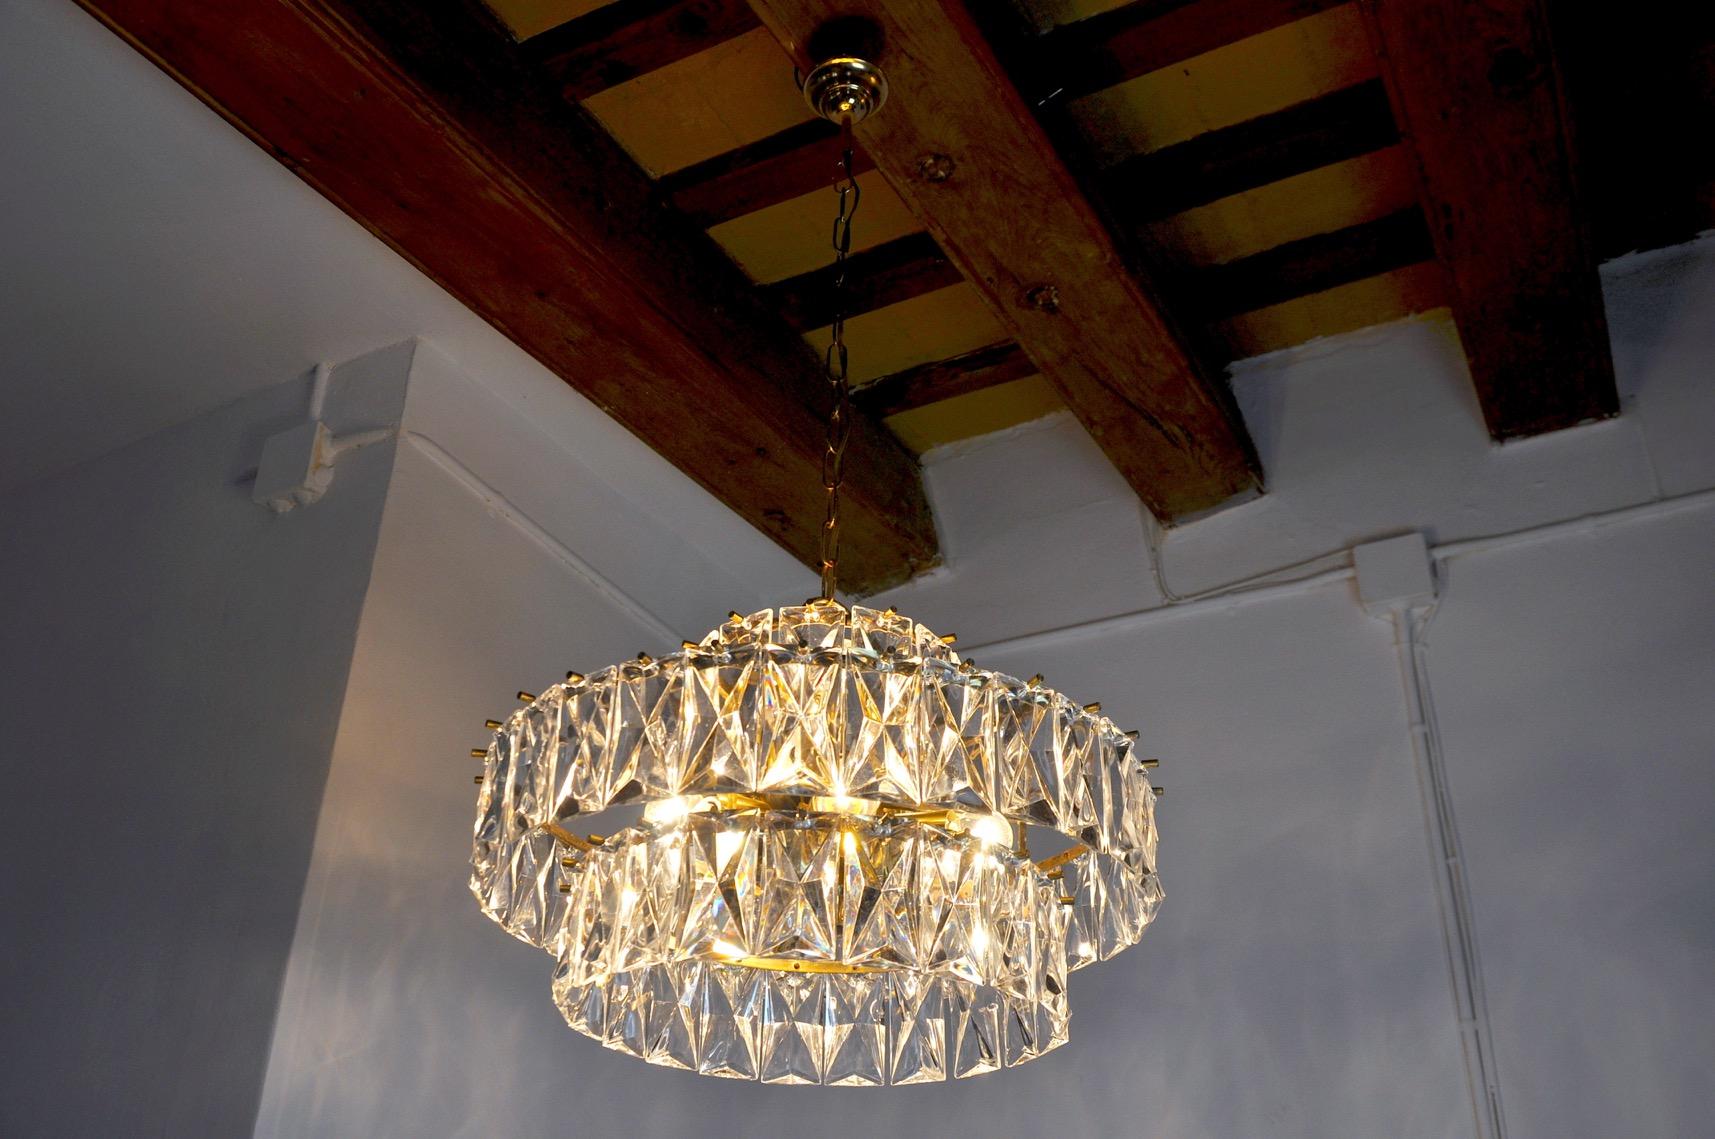 Superb and rare kinkeldey chandelier designated and produced in Germany in the 1970s. Golden structure made up of more than 30 crystals cut in perfect conservation order spread over 3 levels. Rare design object that will illuminate your interior